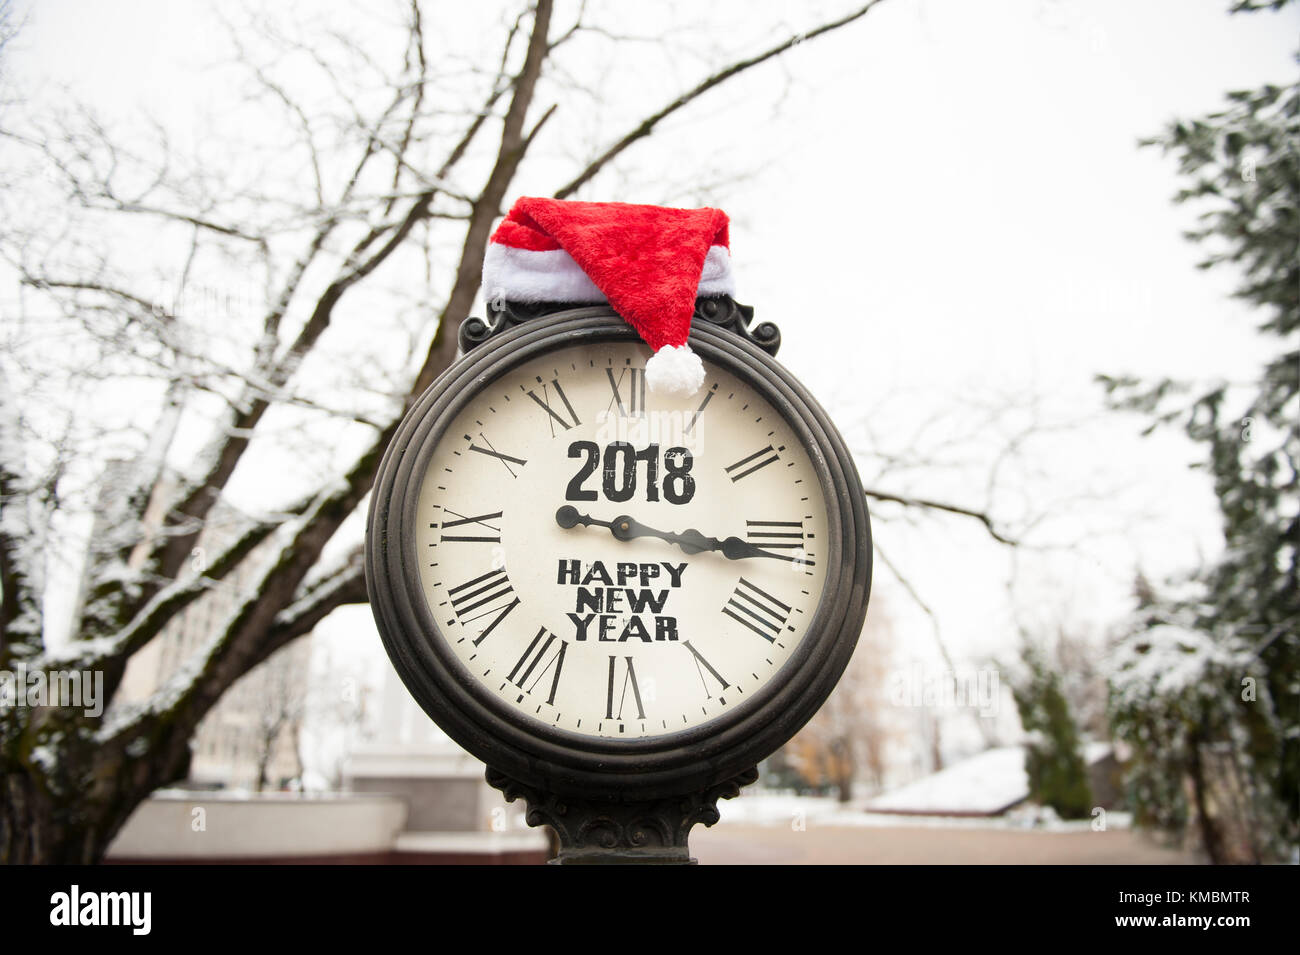 vintage old street clock with the inscription Happy New Year 2018 and Santa Claus hat on them outdoors in winter park Stock Photo